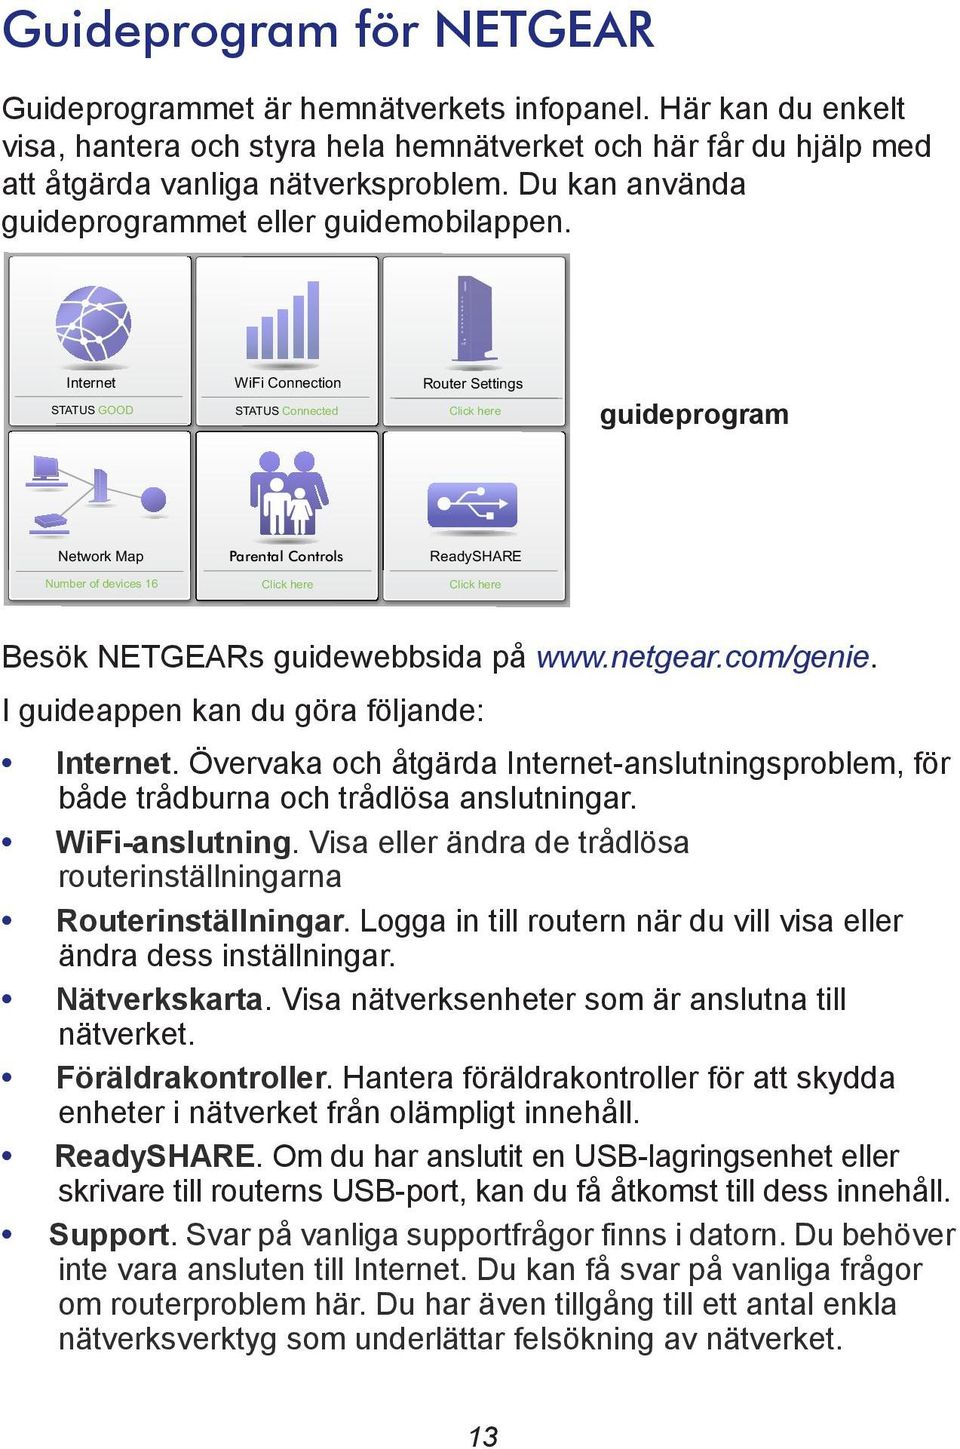 Internet STATUS GOOD WiFi Connection STATUS Connected Router Settings Click here guideprogram Network Map Parental Controls ReadySHARE Number of devices 16 Click here Click here Besök NETGEARs